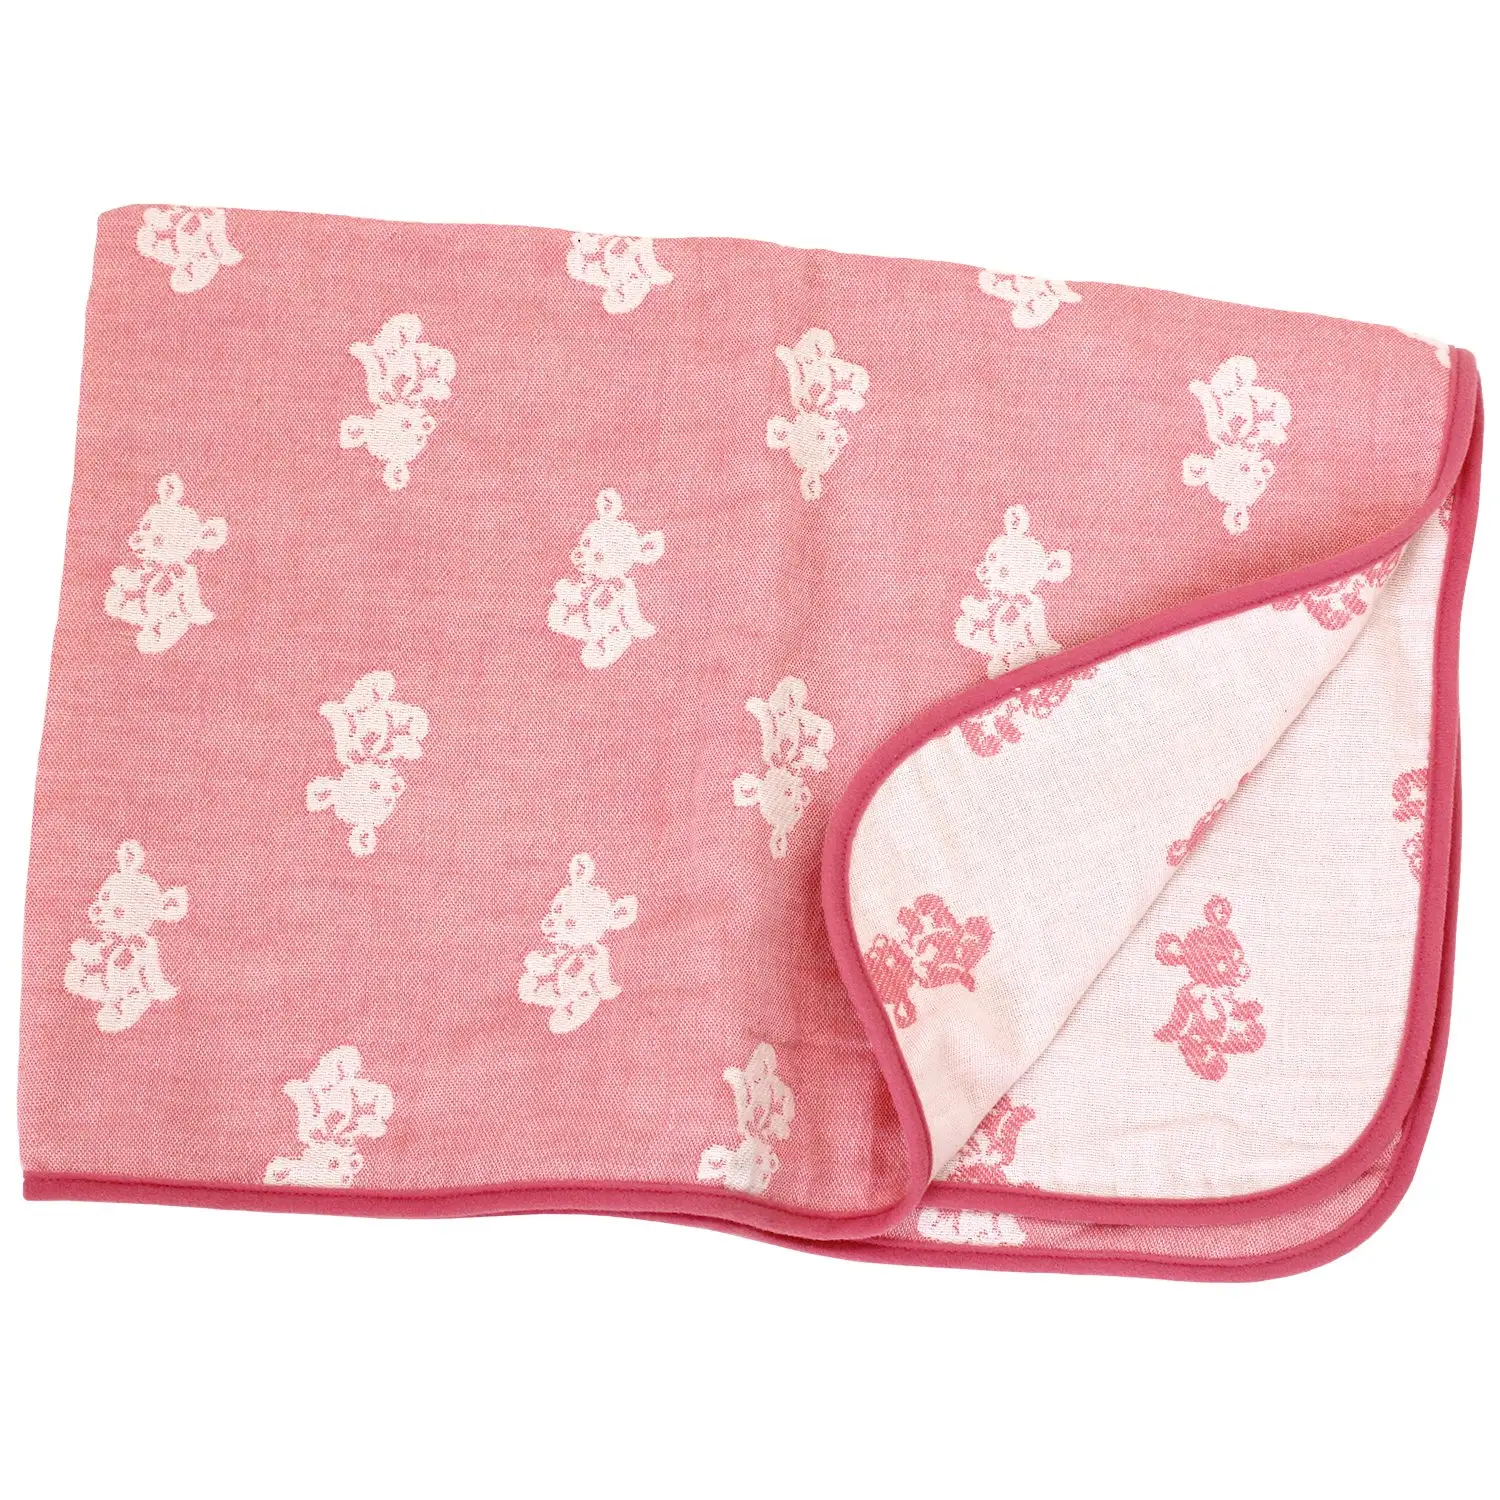 [Wholesale Products] Made in Japan 4-Layered Gauze Baby Blanket Usual Size 70cm*100cm 100% Cotton Breathable Low MOQ Soft Pink